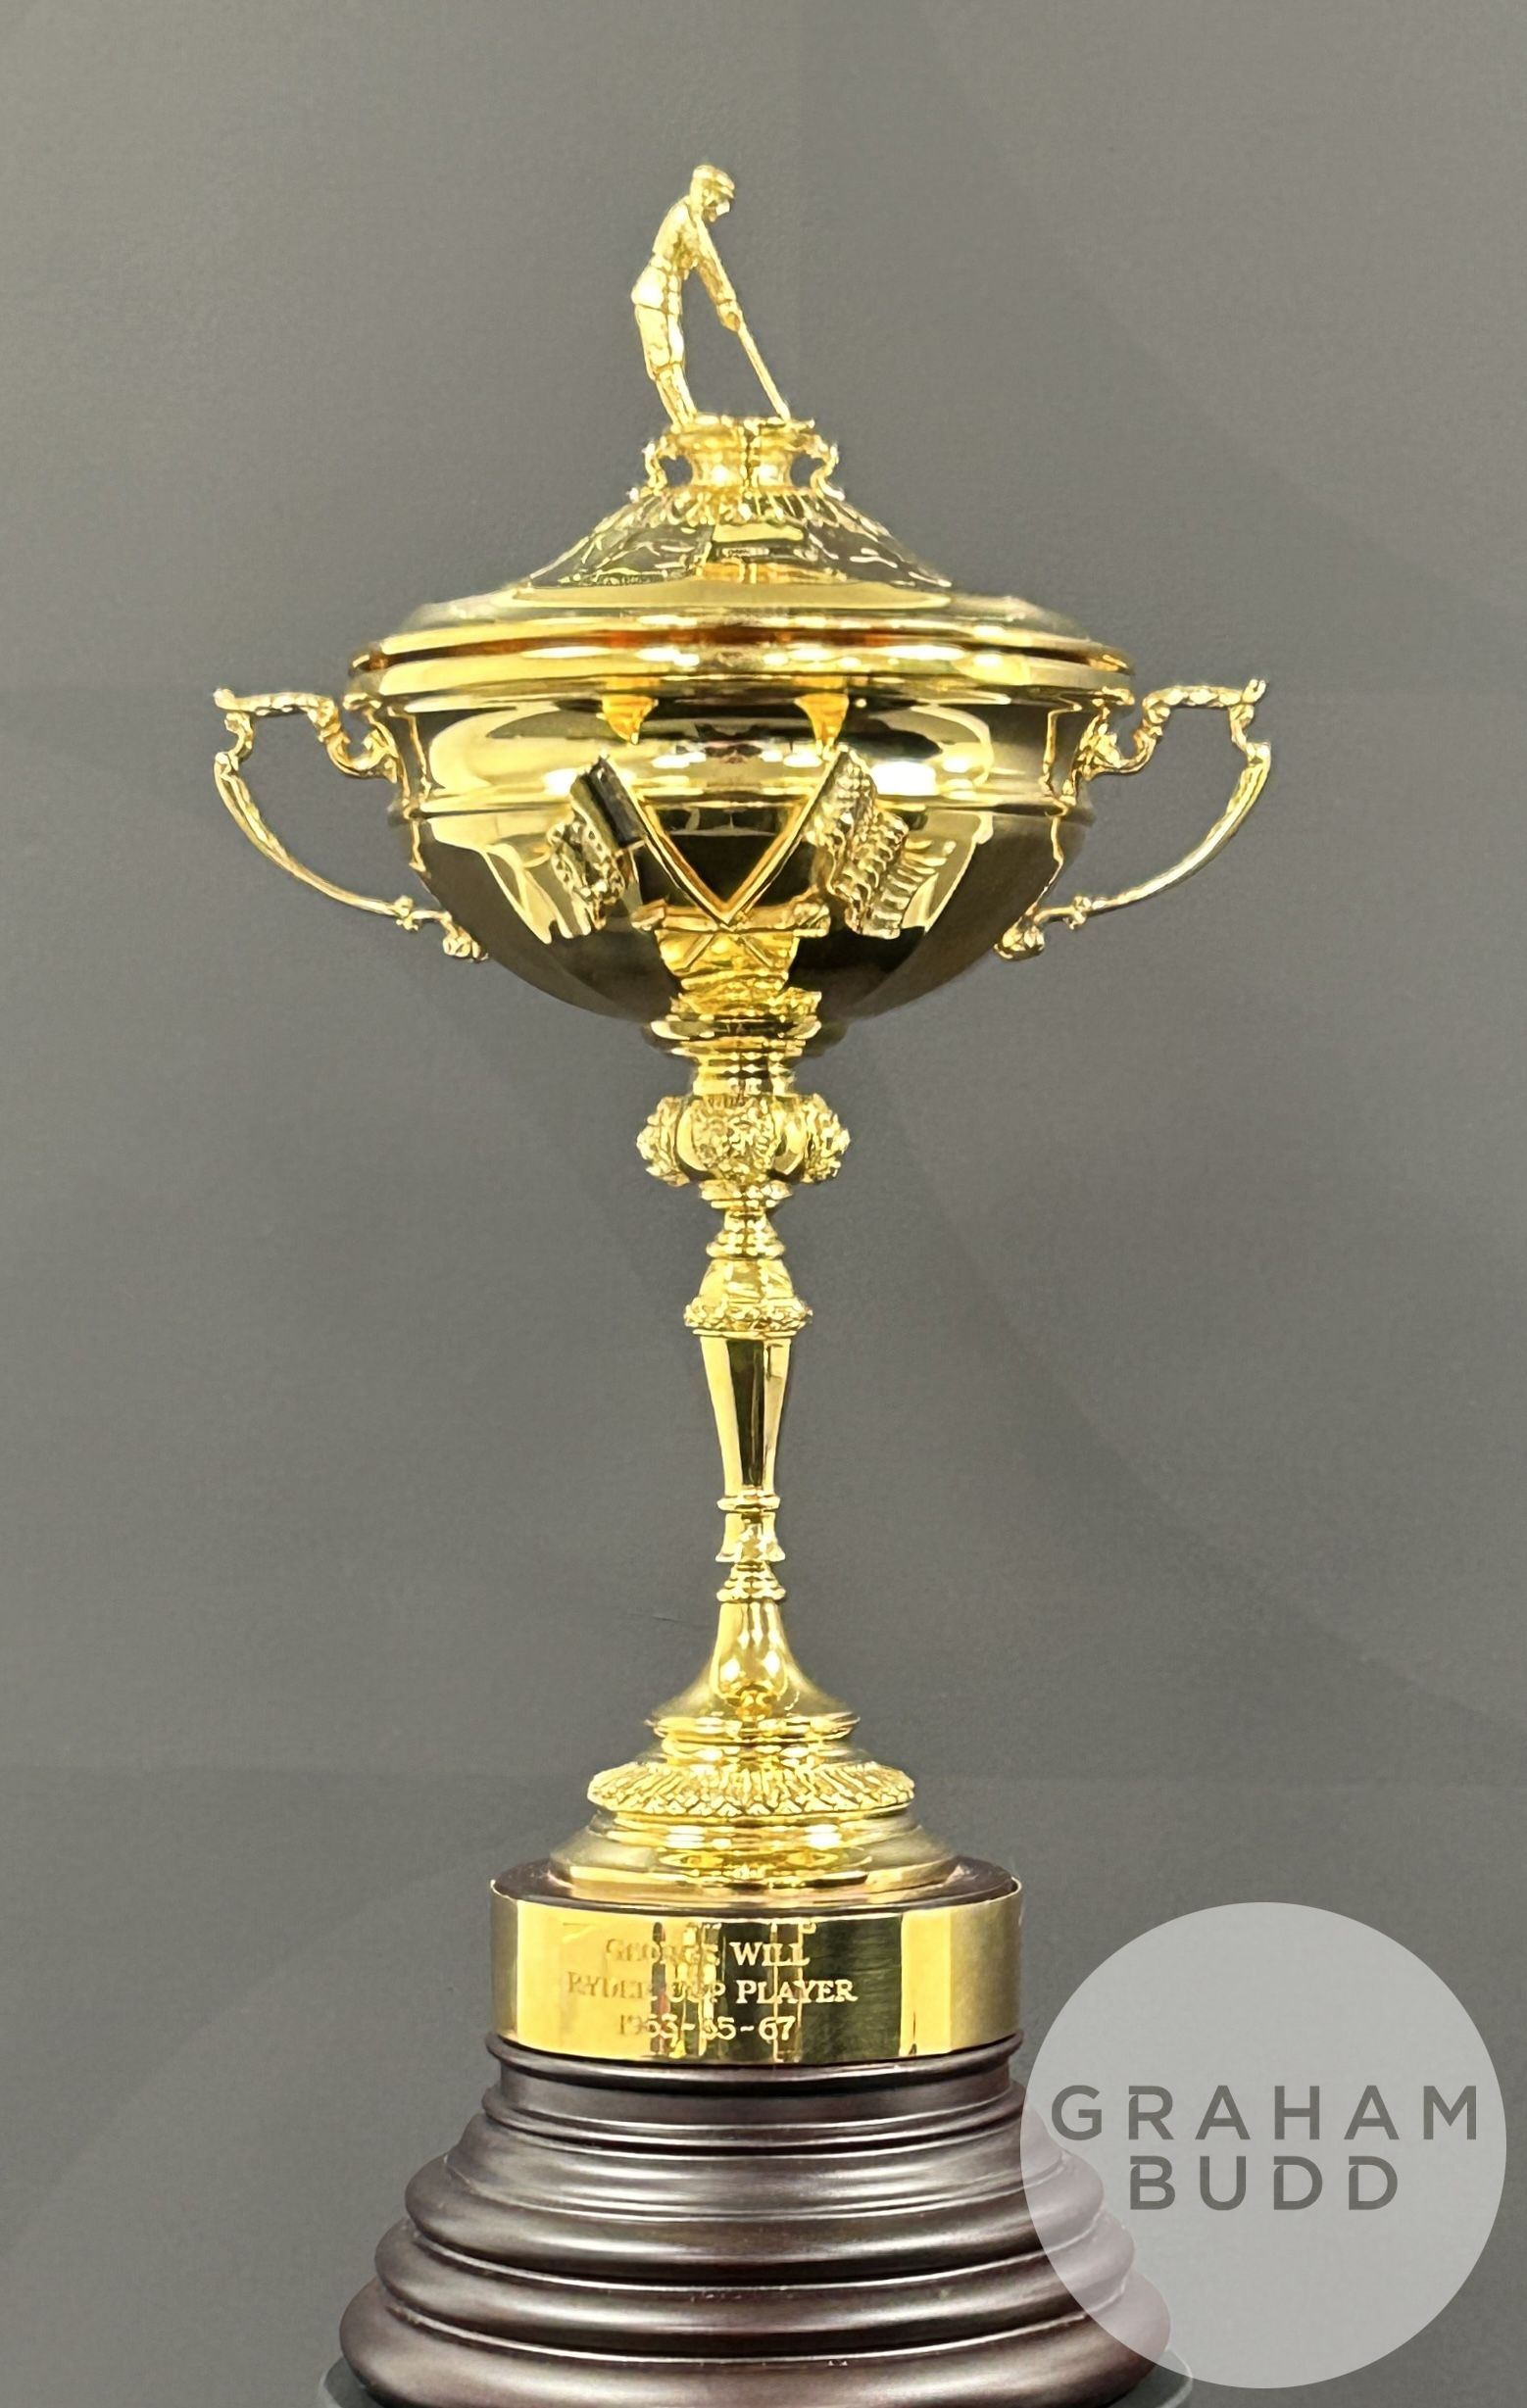 George Will rare silver-gilt replica Ryder Cup trophy